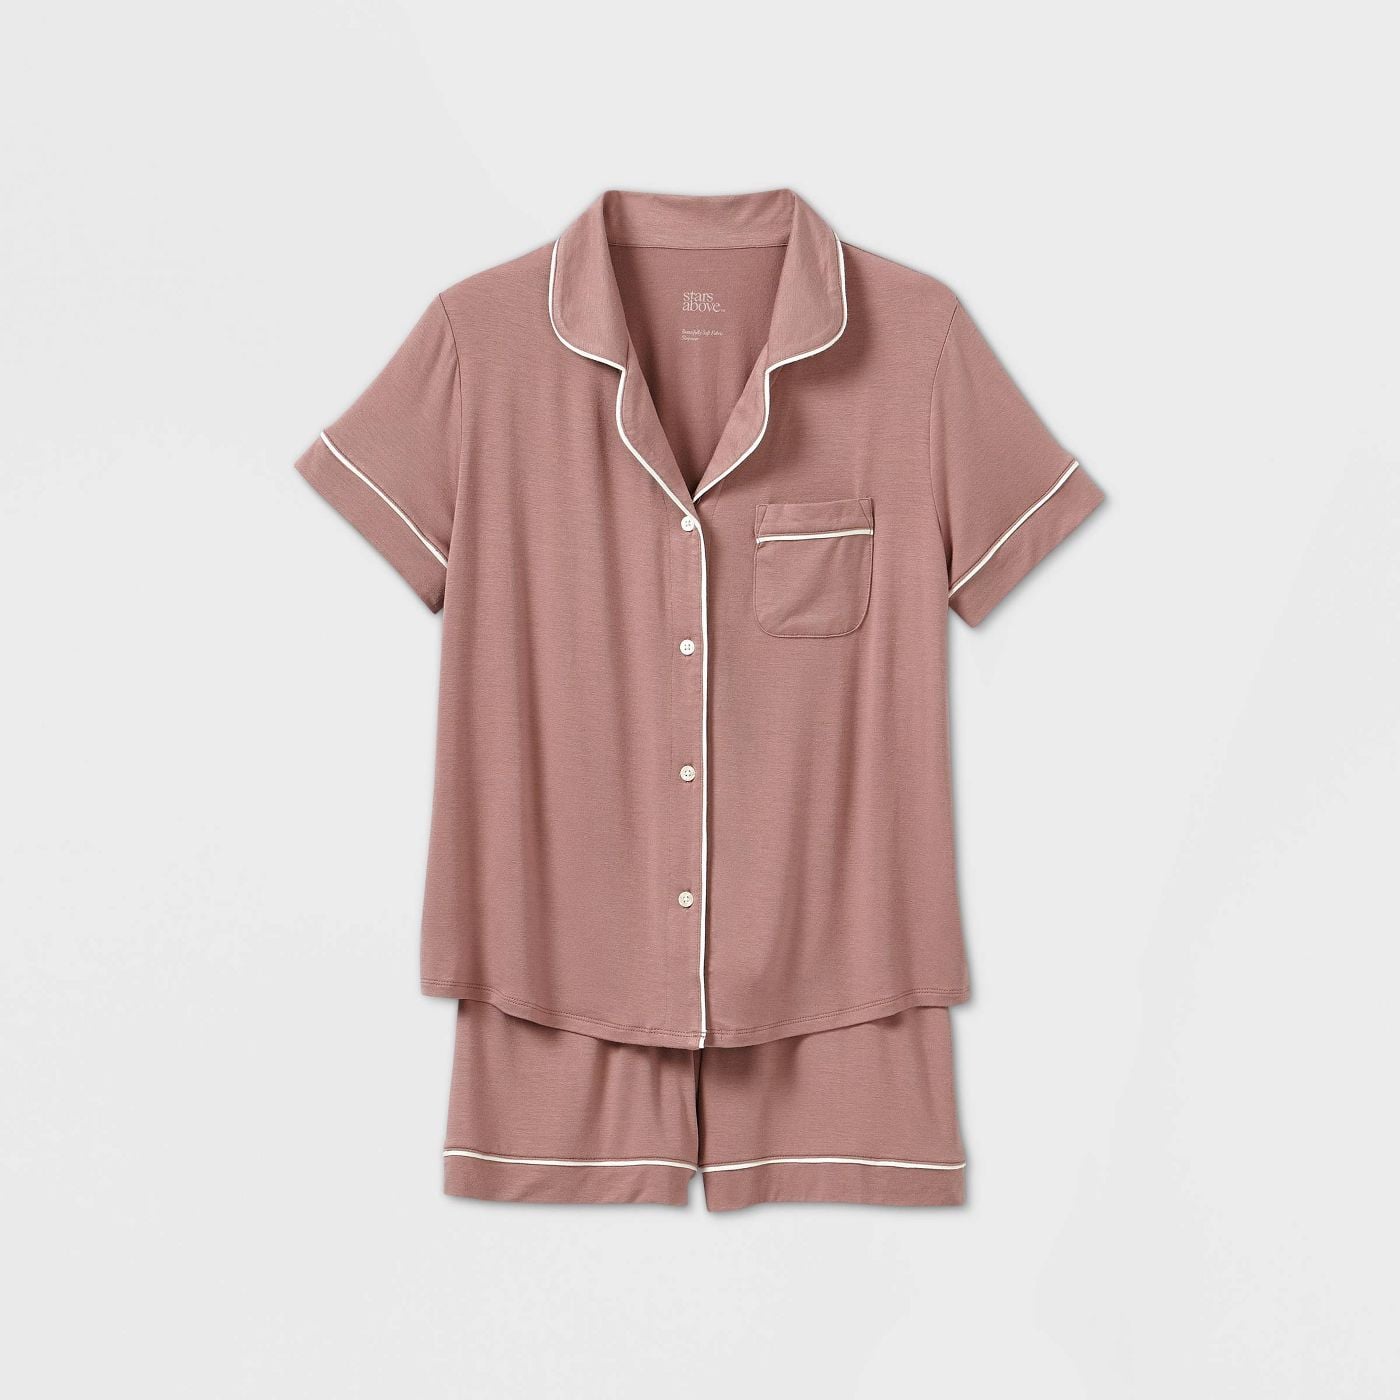 Stars Above Women's Beautifully Soft Short Sleeve Notch Collar Top and  Shorts Pajama Set in Gray, I Couldn't Resist These Butter-Soft PJs at  Target — and at $22, I May Need Another Set